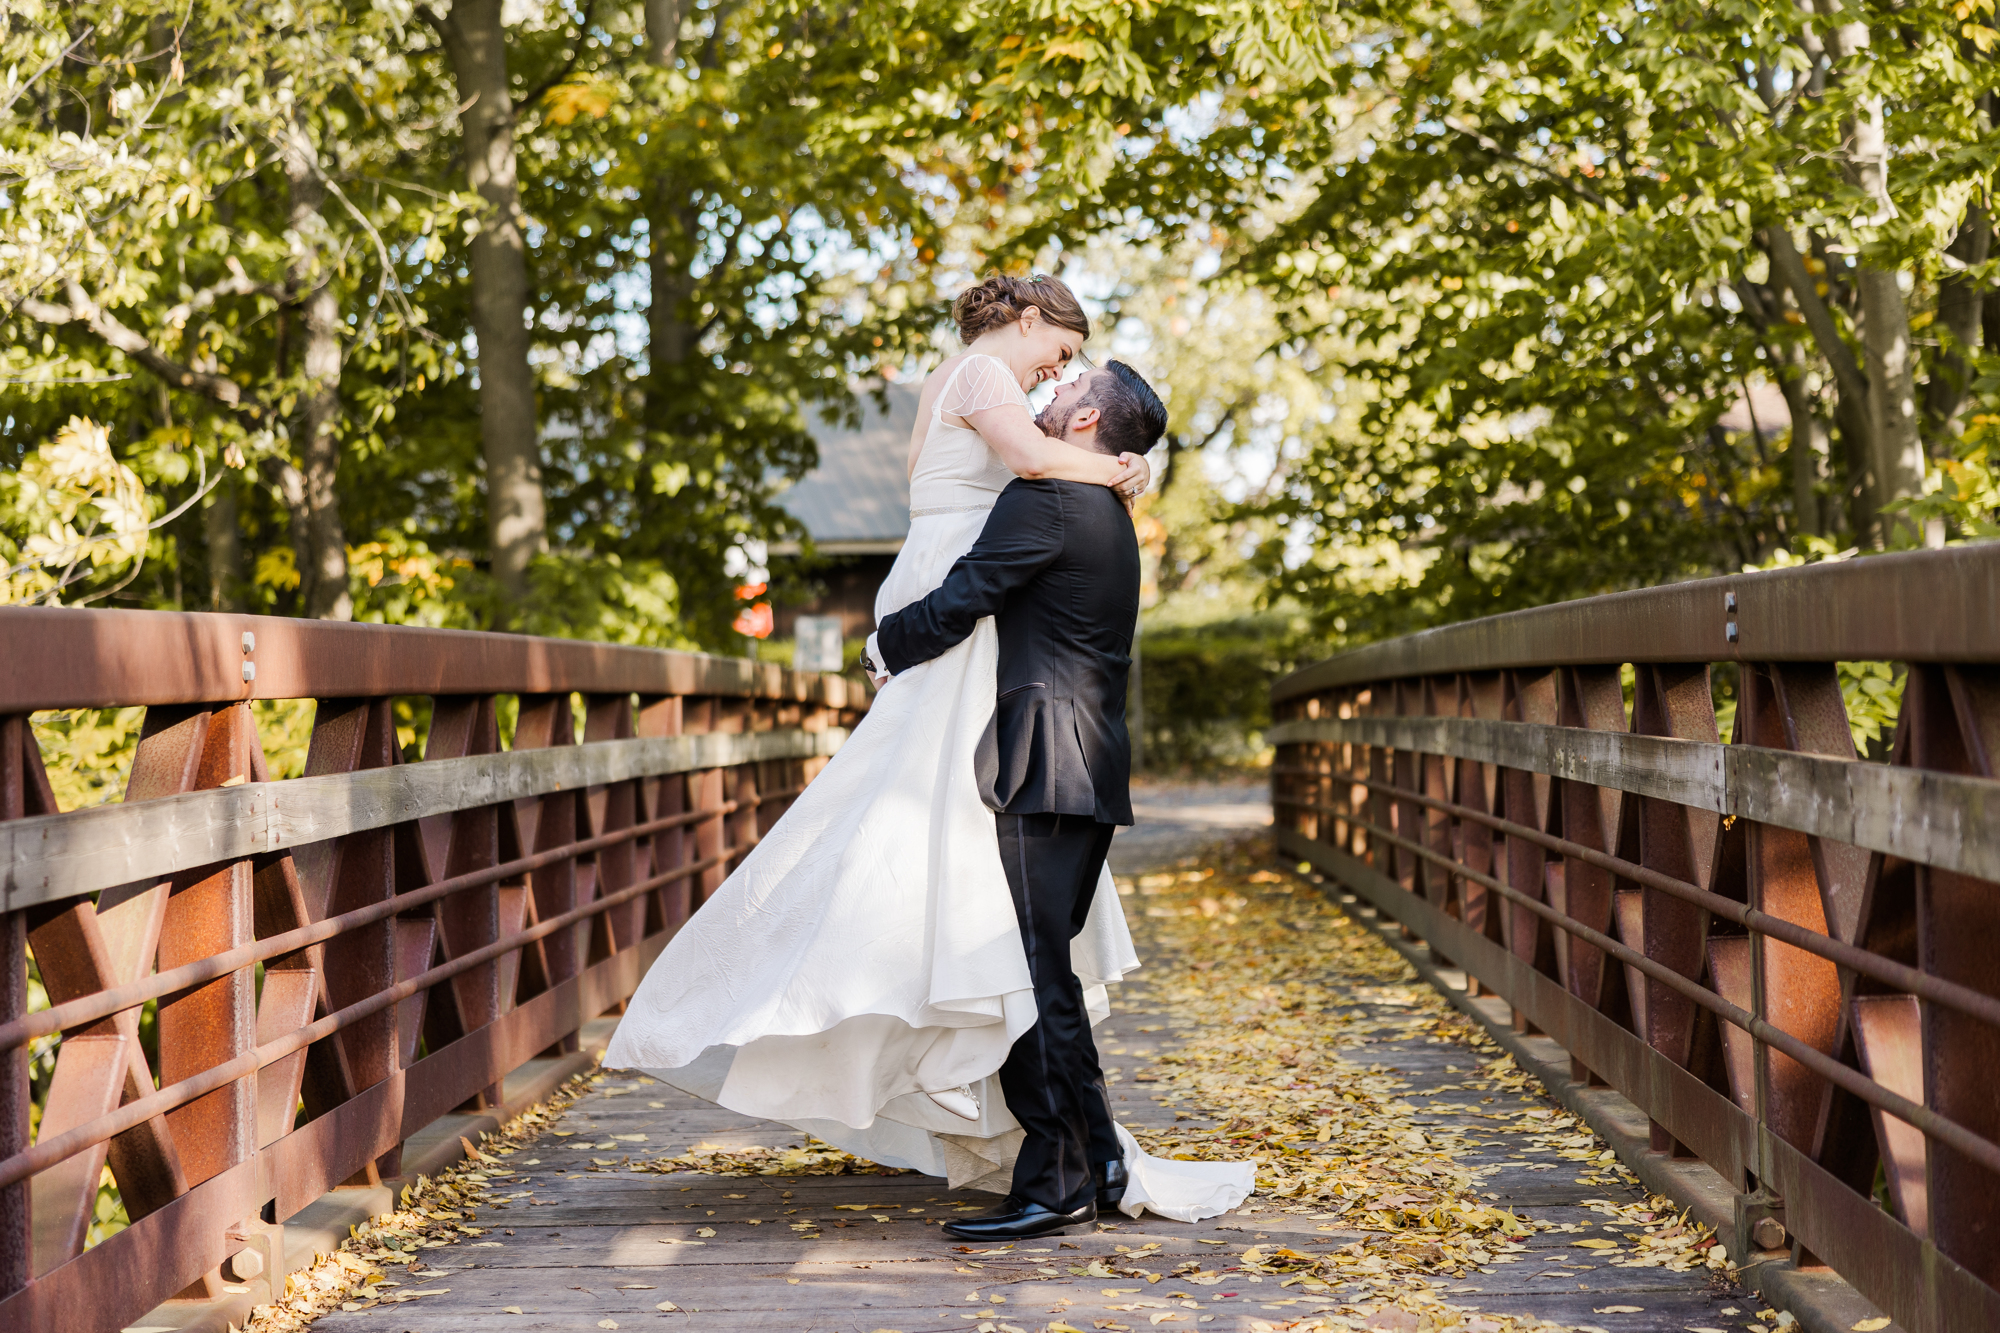 Candid Gate House Wedding in Ontario, Canada